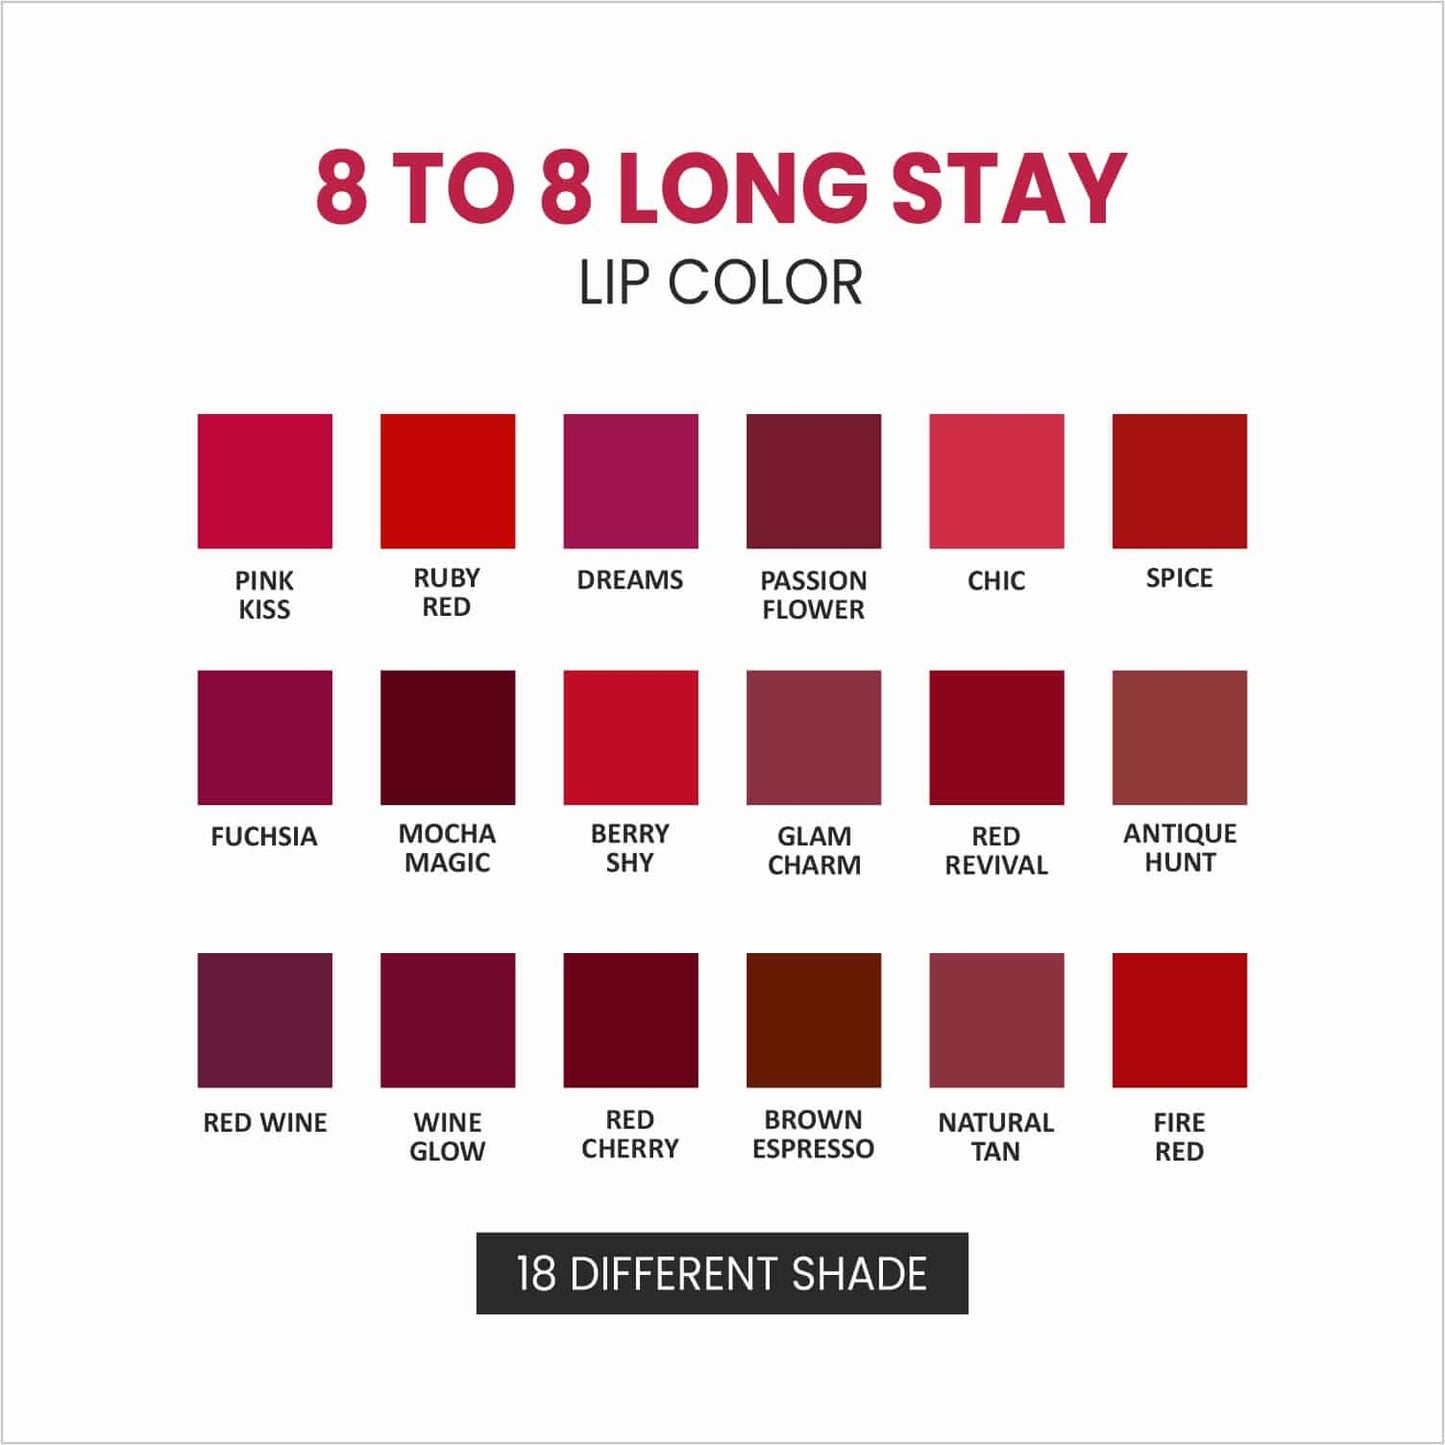 8 To 8 Lip Color - 113 Red Wine